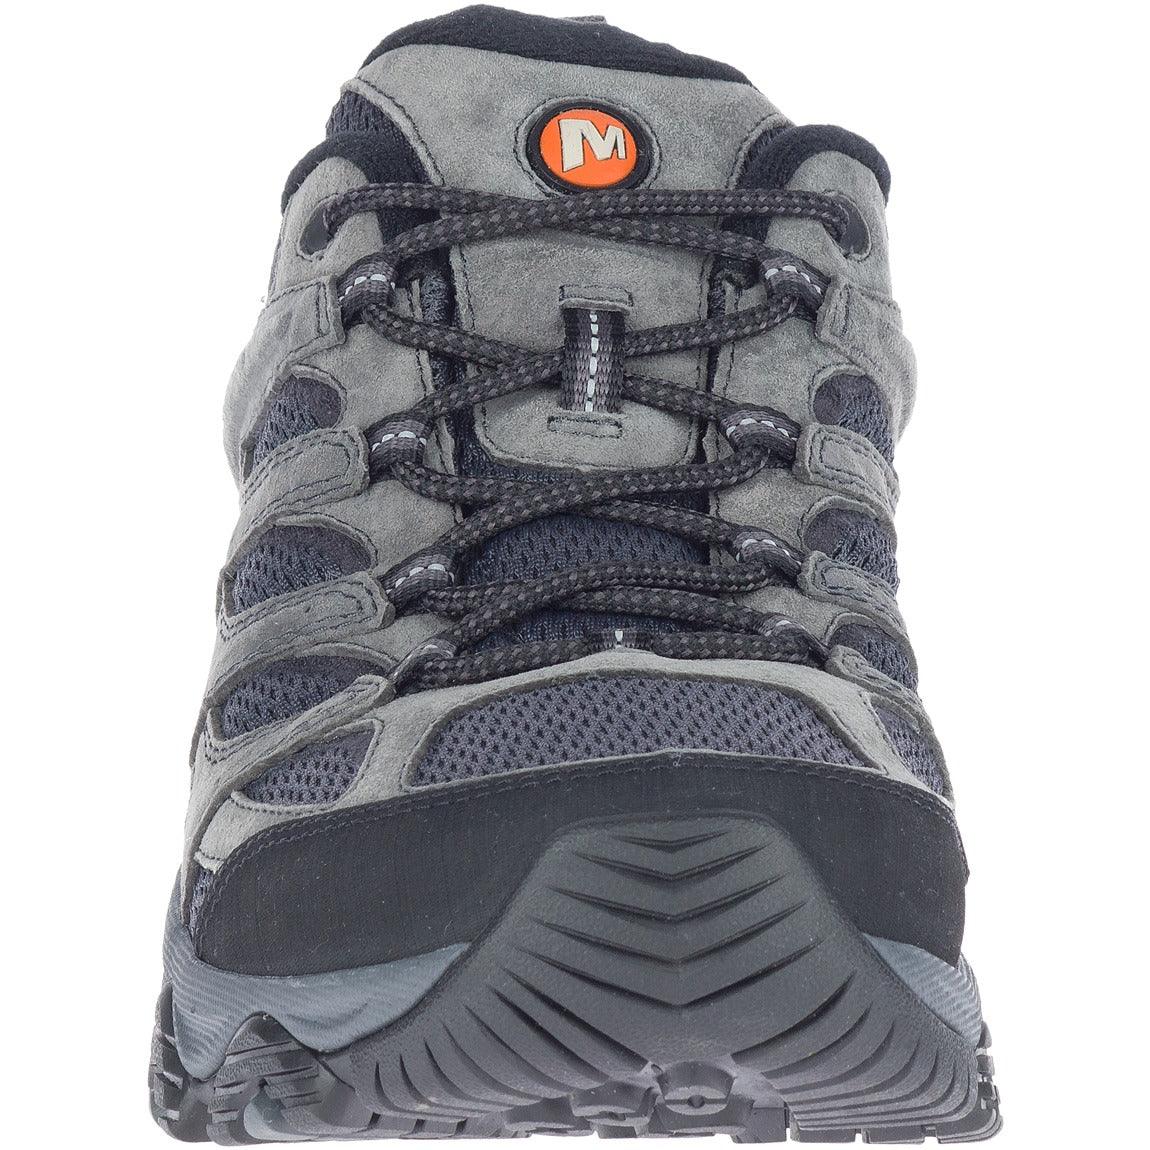 Moab 3 Hiking Shoes - Men - Sports Excellence